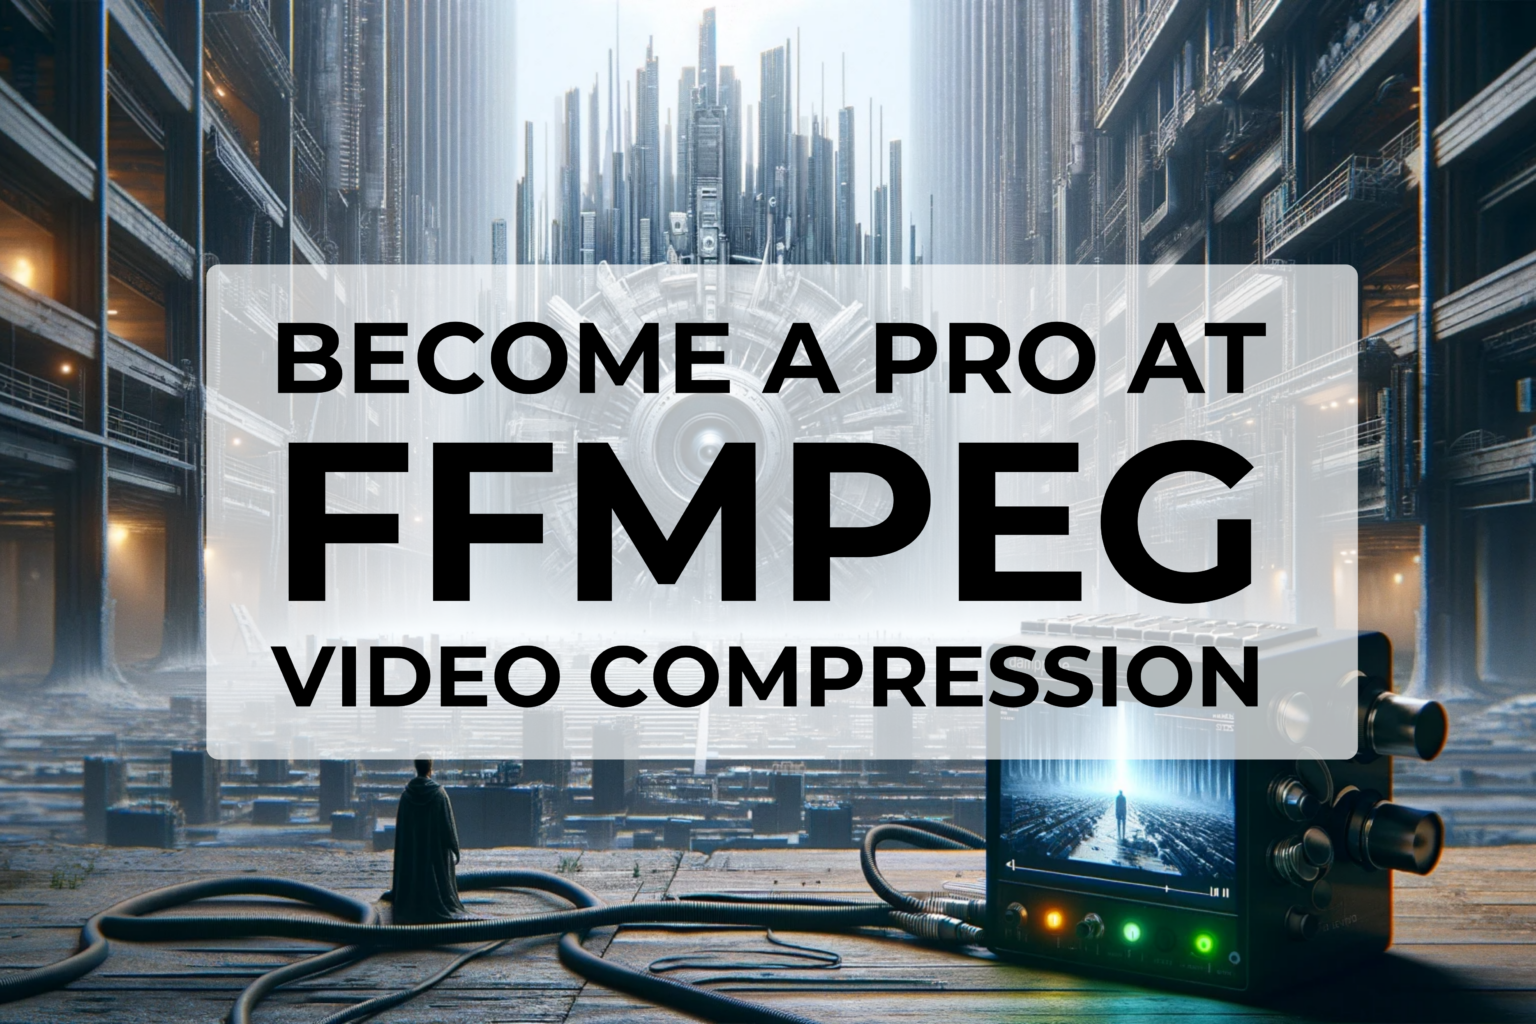 An example of video compression using FFmpeg